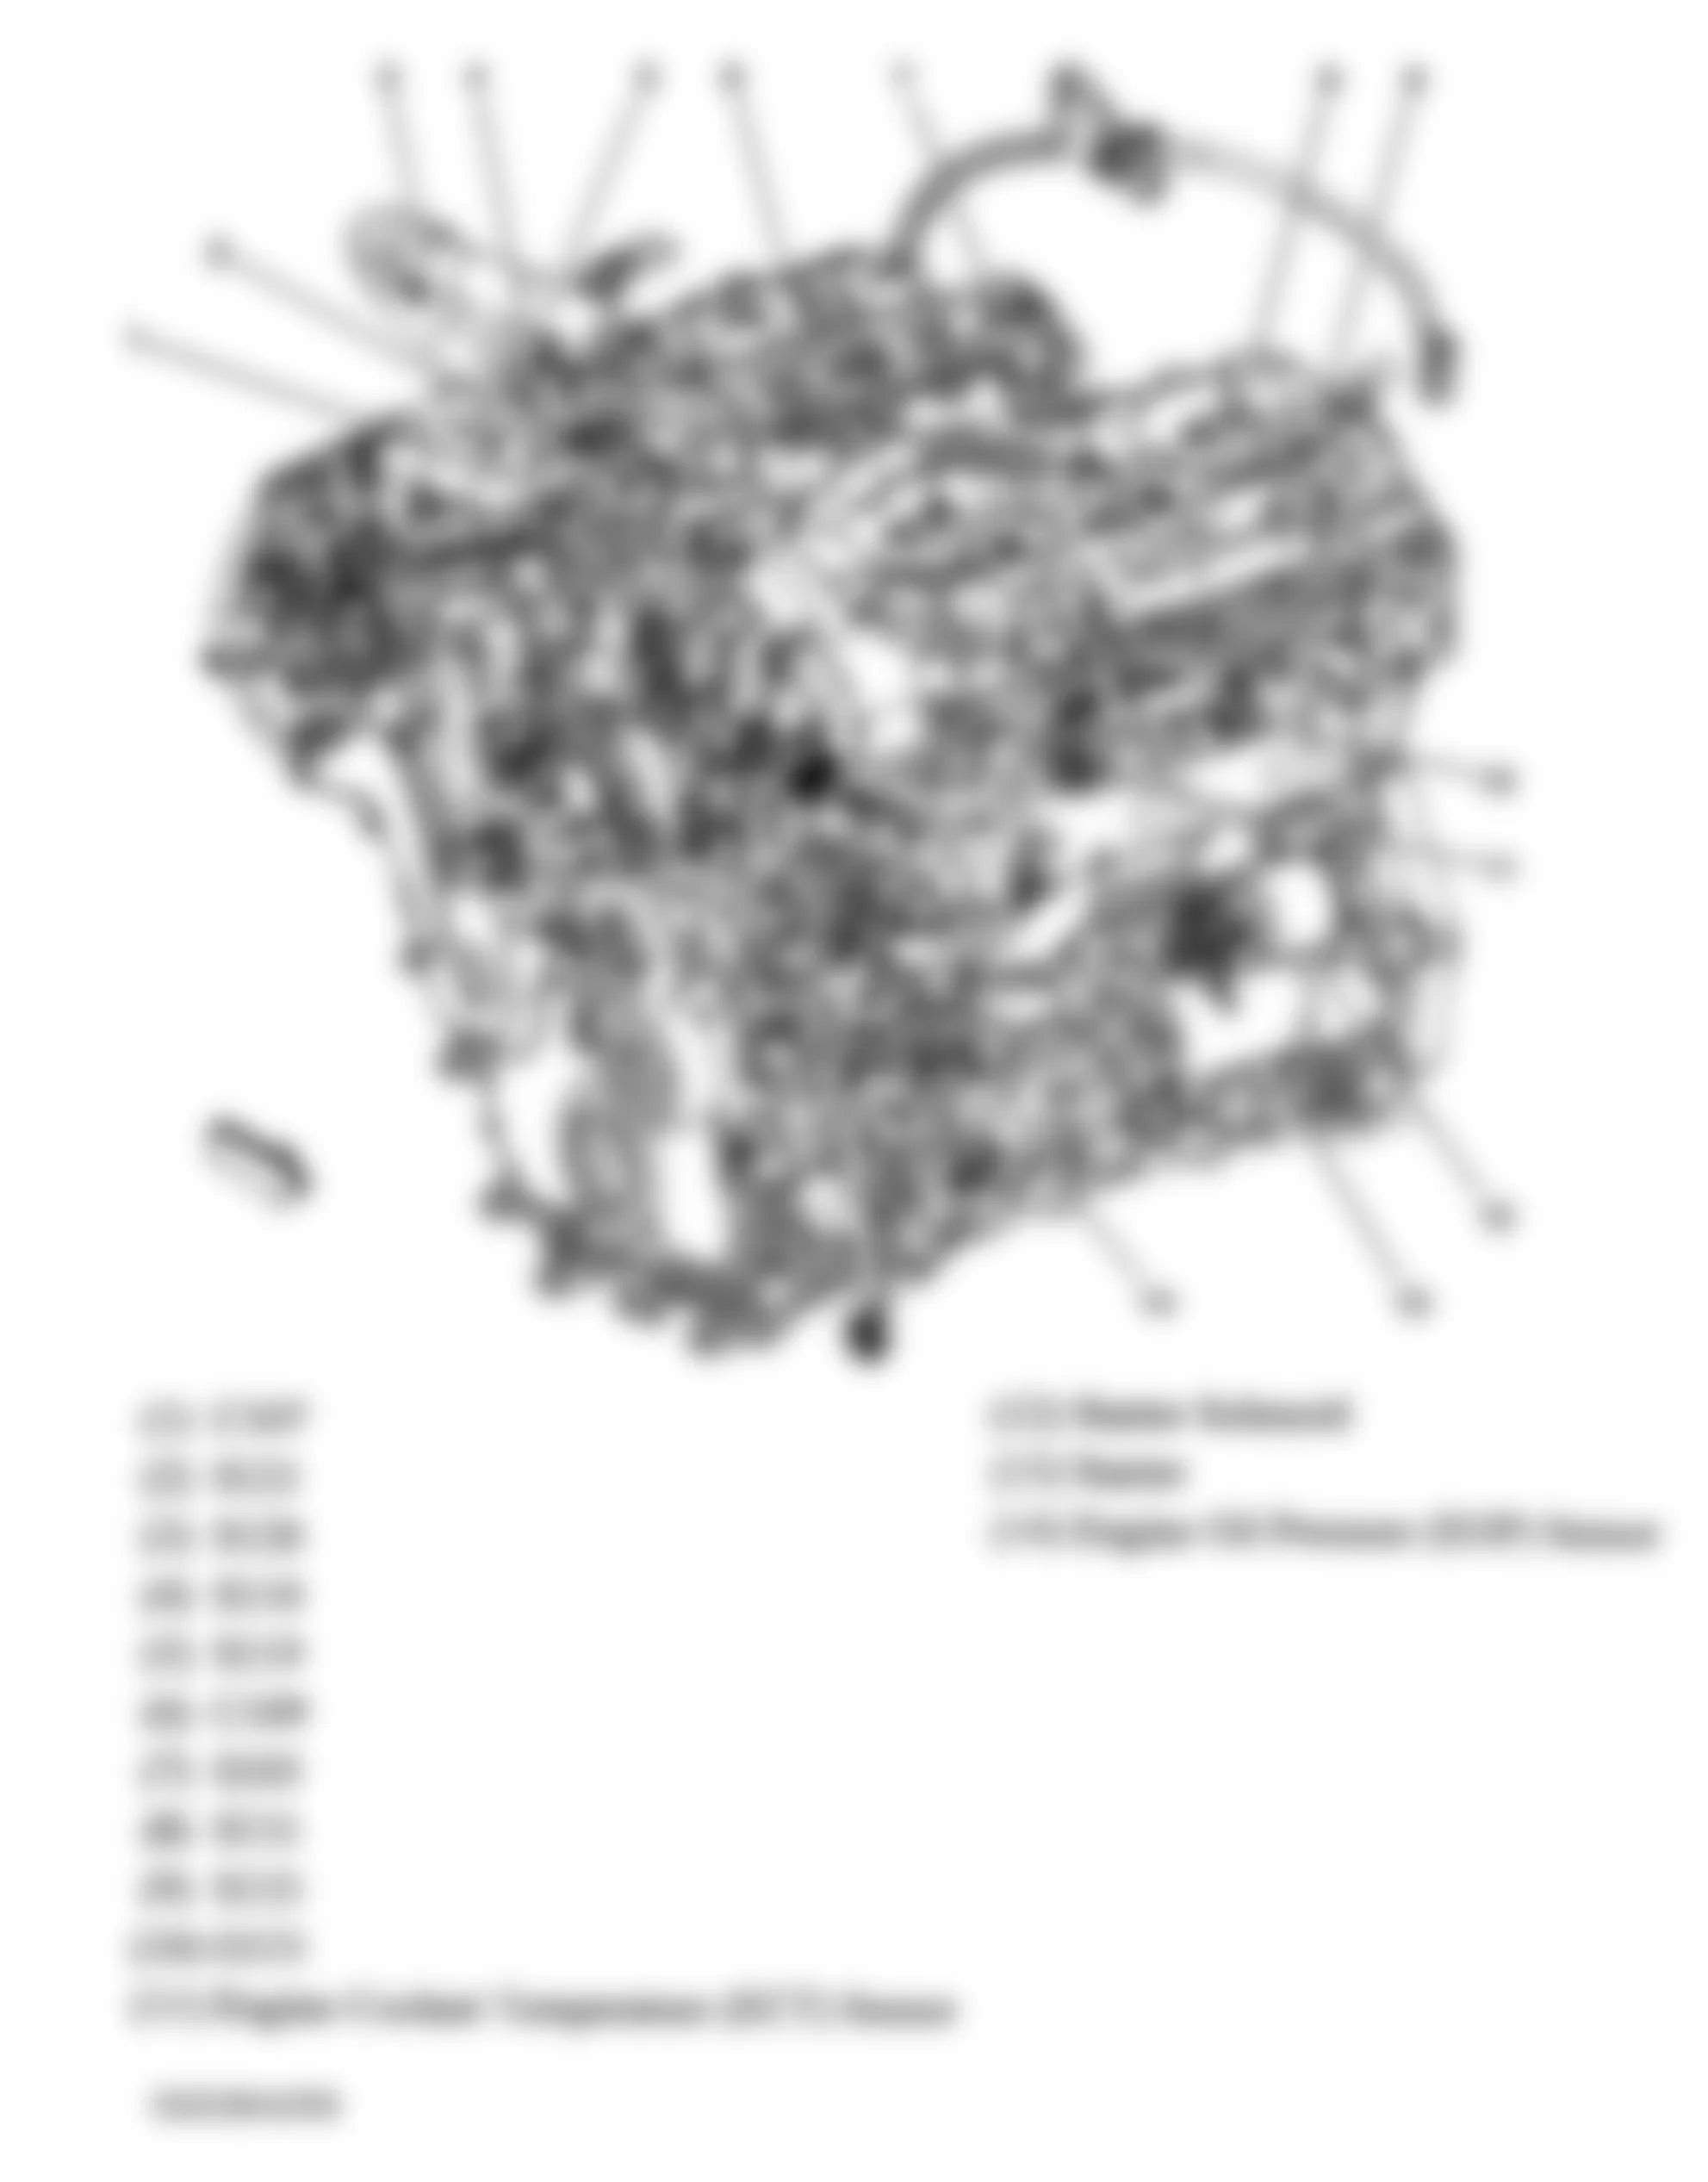 Buick LaCrosse CXL 2005 - Component Locations -  Front Of Engine (3.6L)